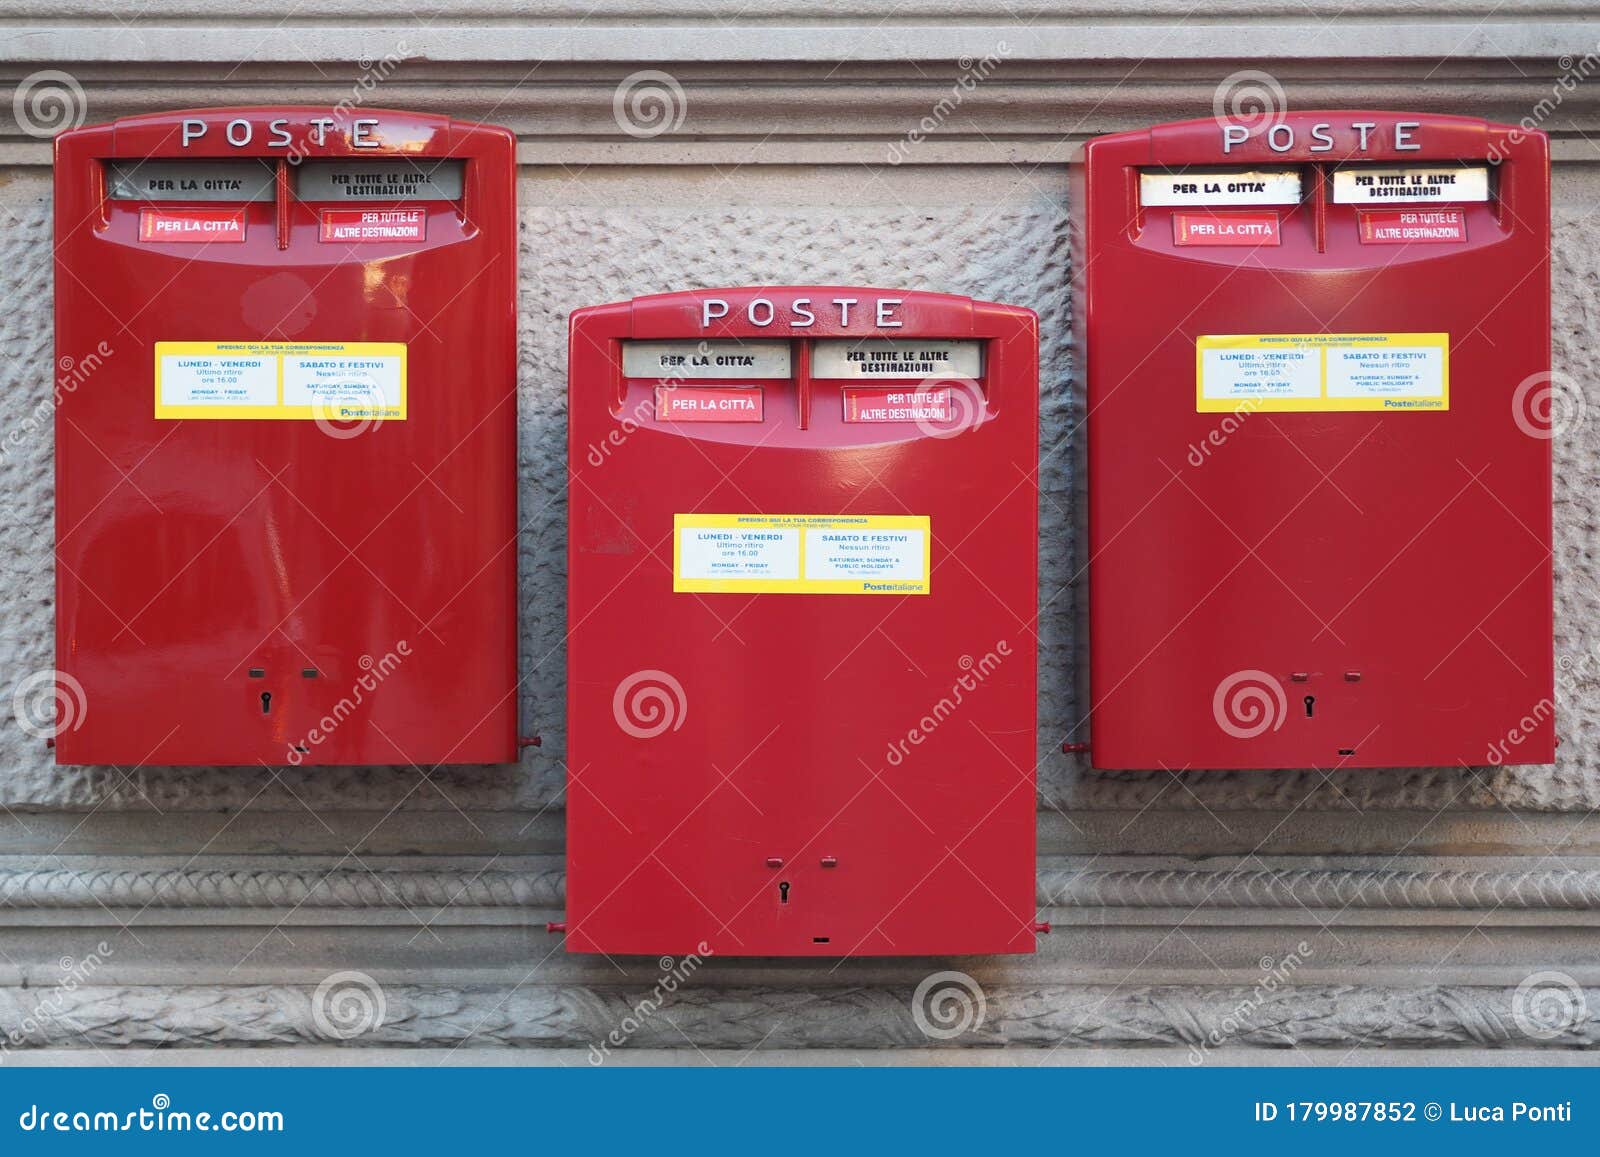 three red mailboxes